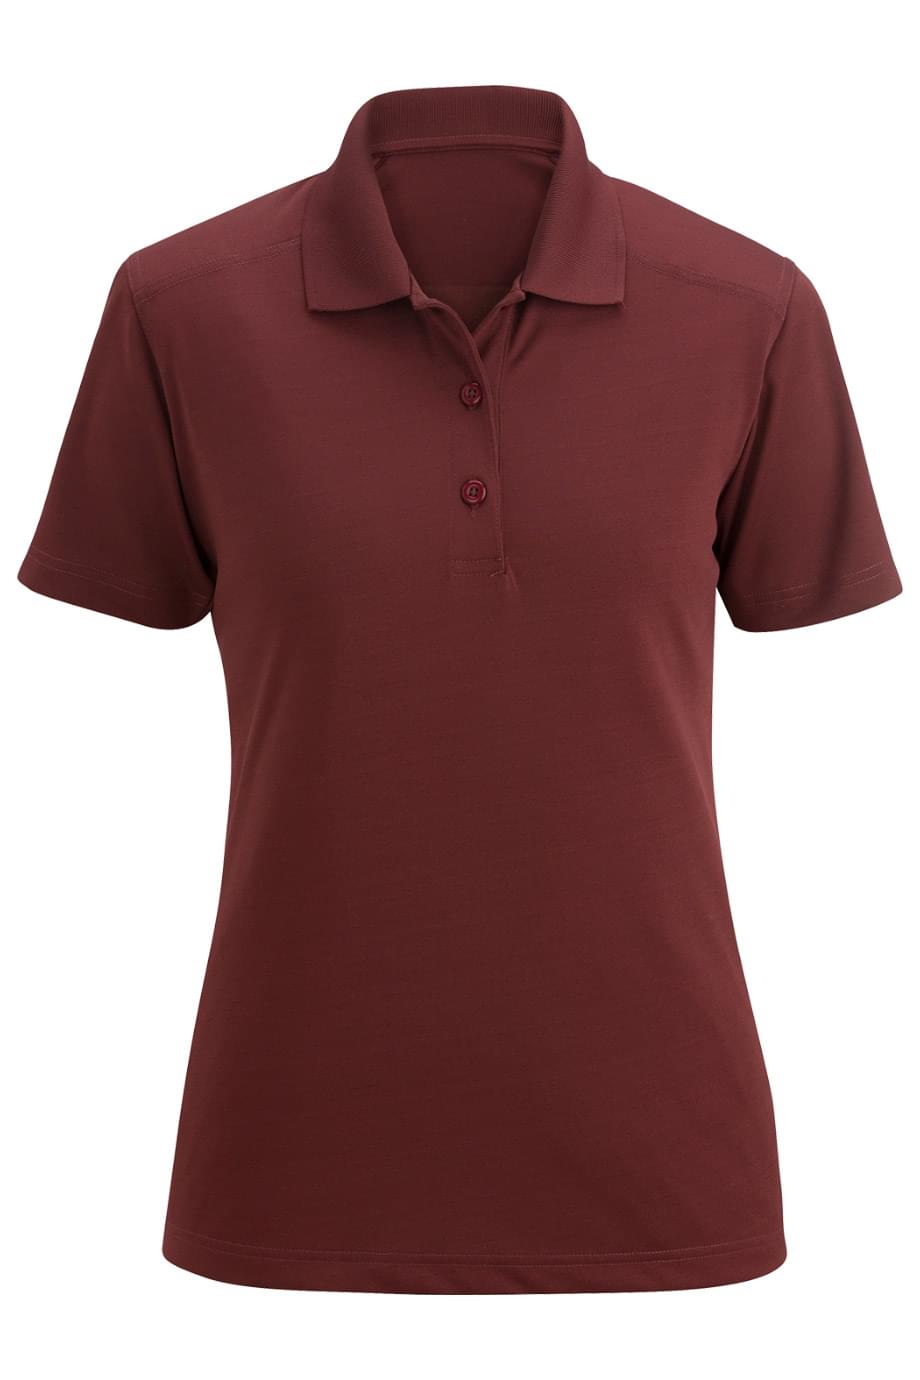 Edwards Snag-Proof Polo 5512 for Women Burgundy